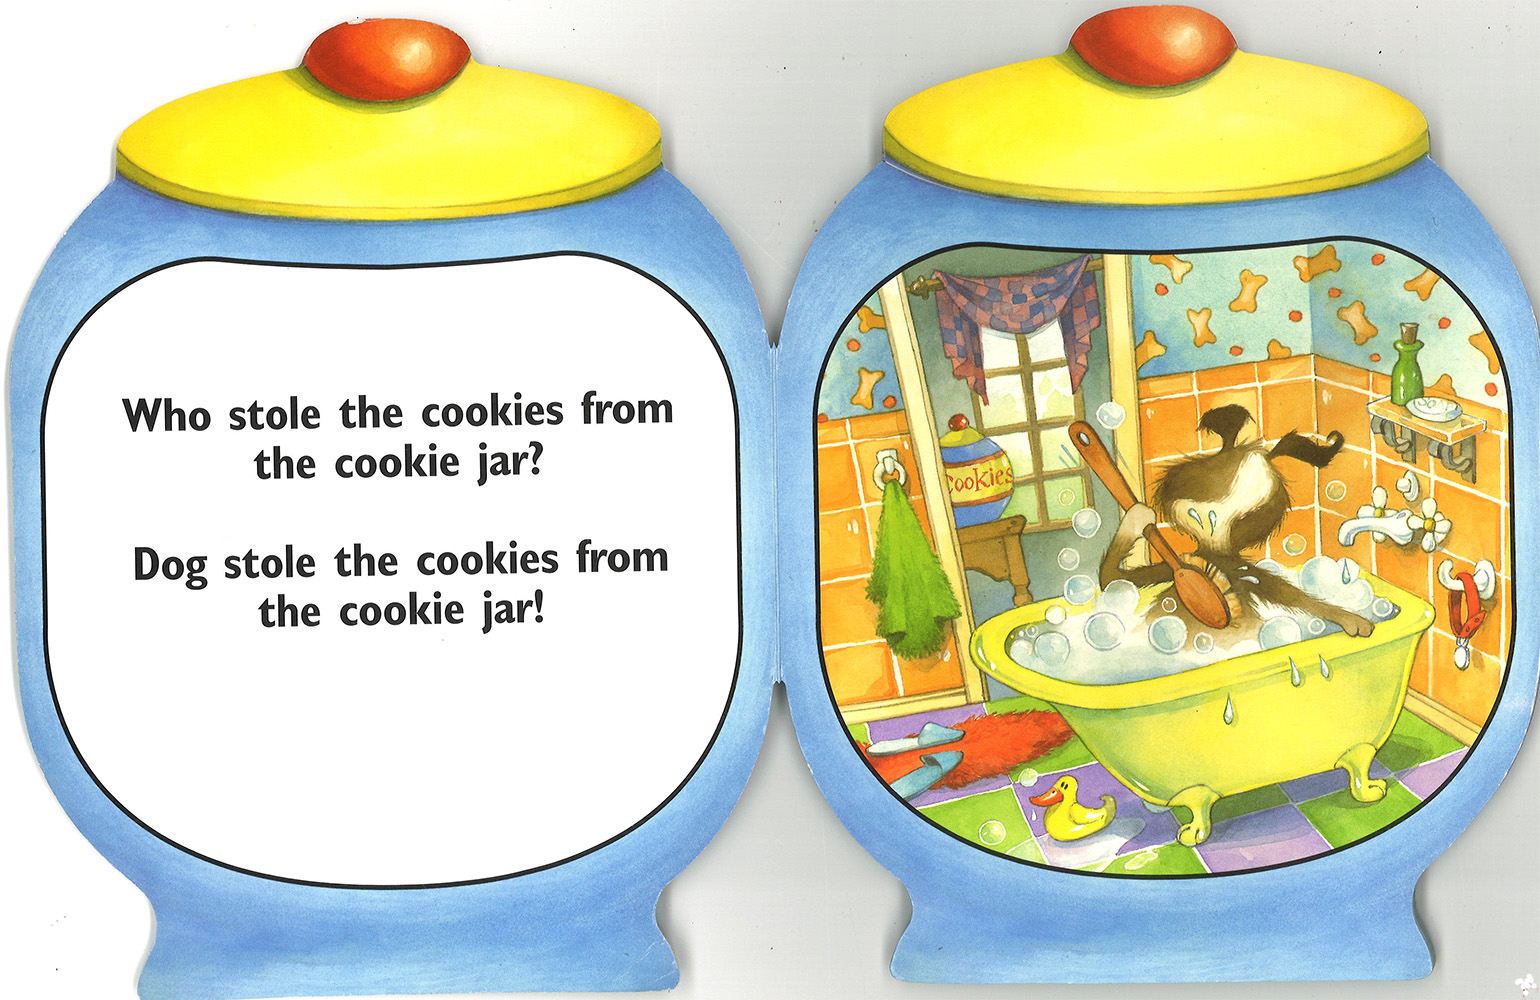 Who Stole the Cookies from the CookieJar